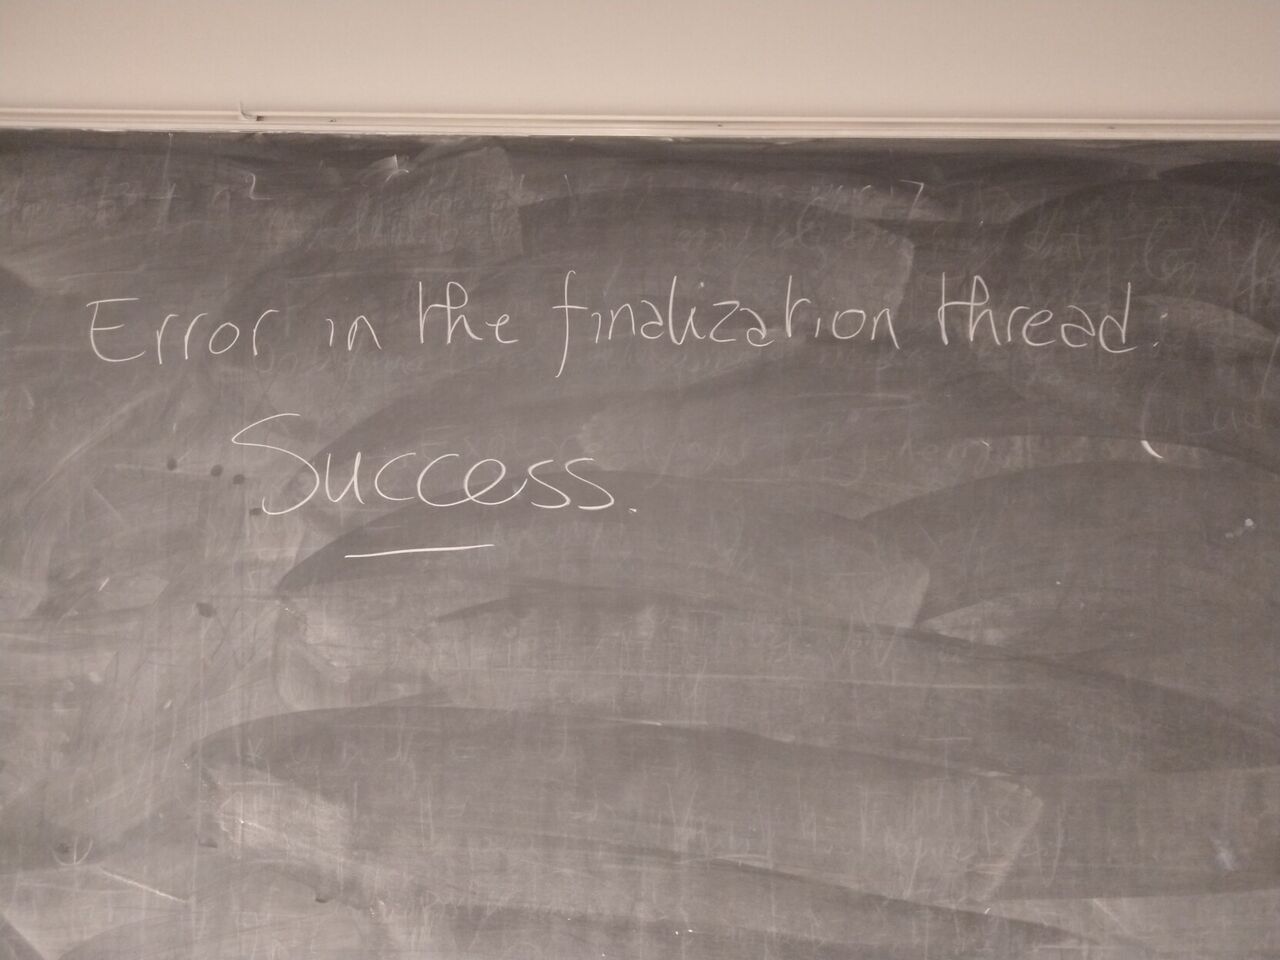 “Error in the finalization thread: Success” (reference to an infamous Guix System message at boot).